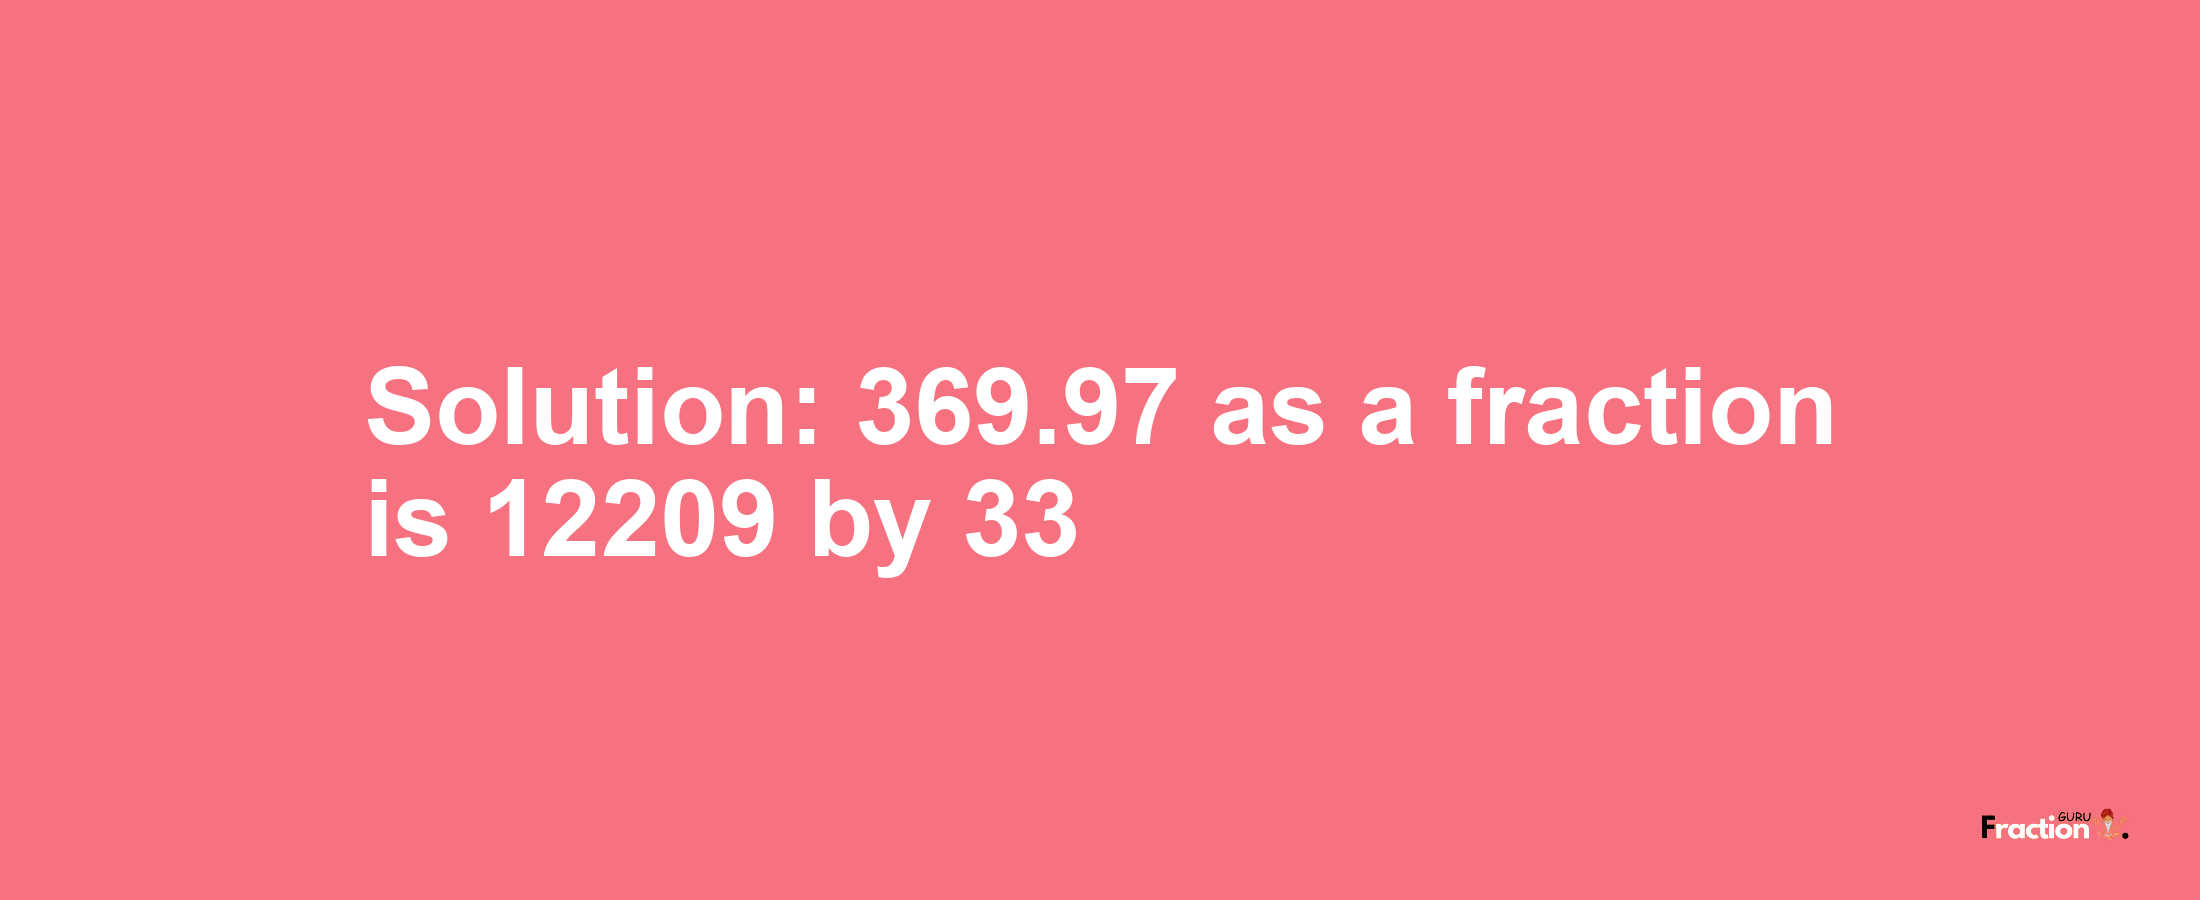 Solution:369.97 as a fraction is 12209/33